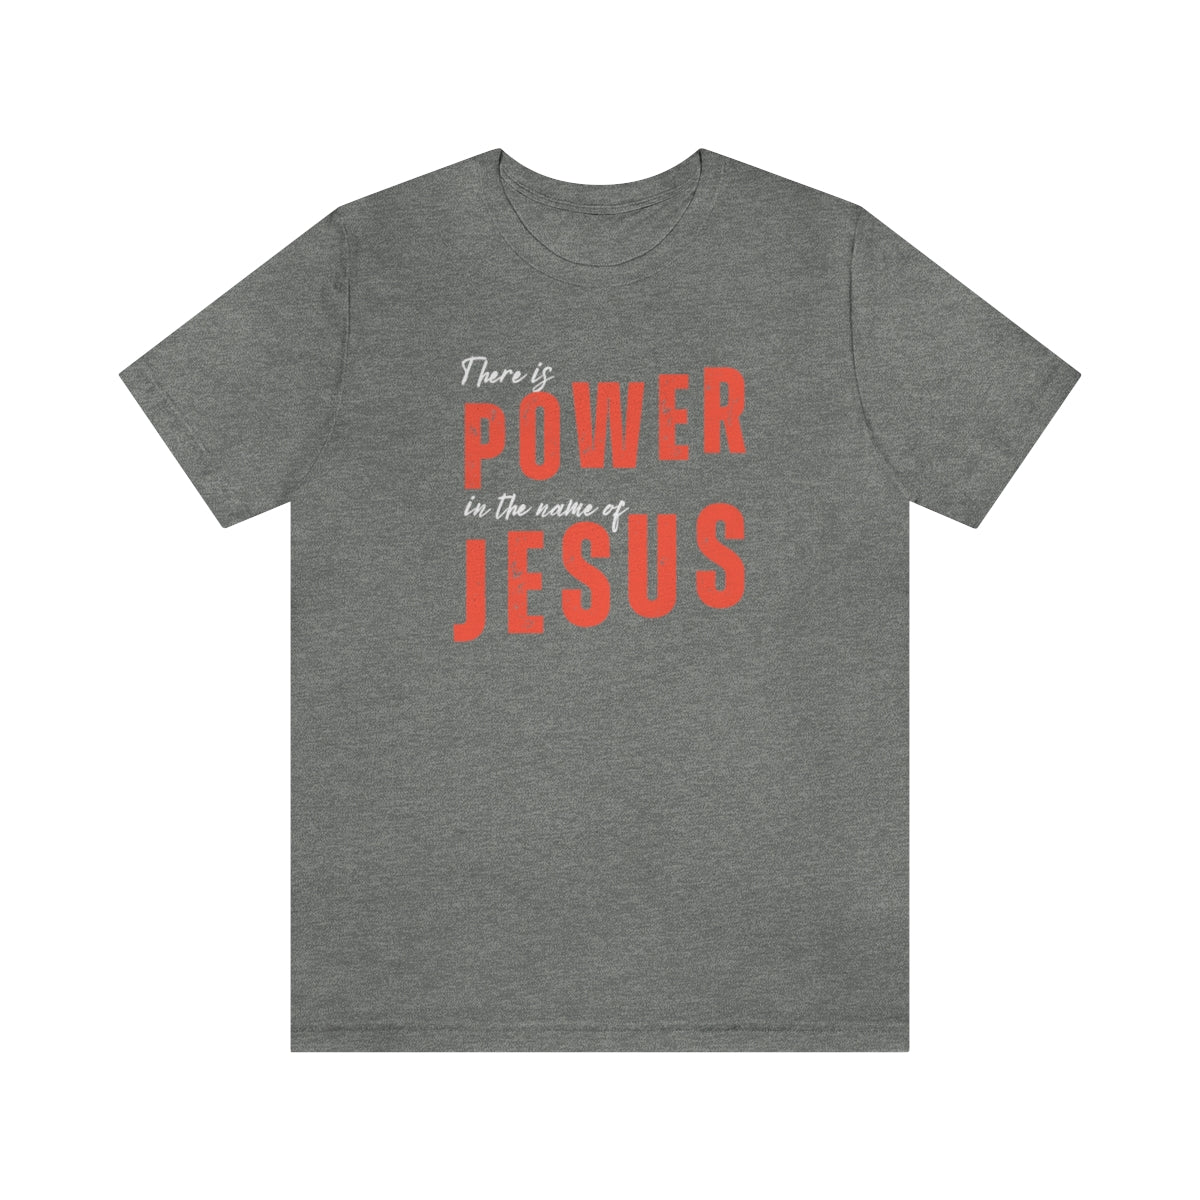 Power In The Name Of Jesus Womens T-Shirt